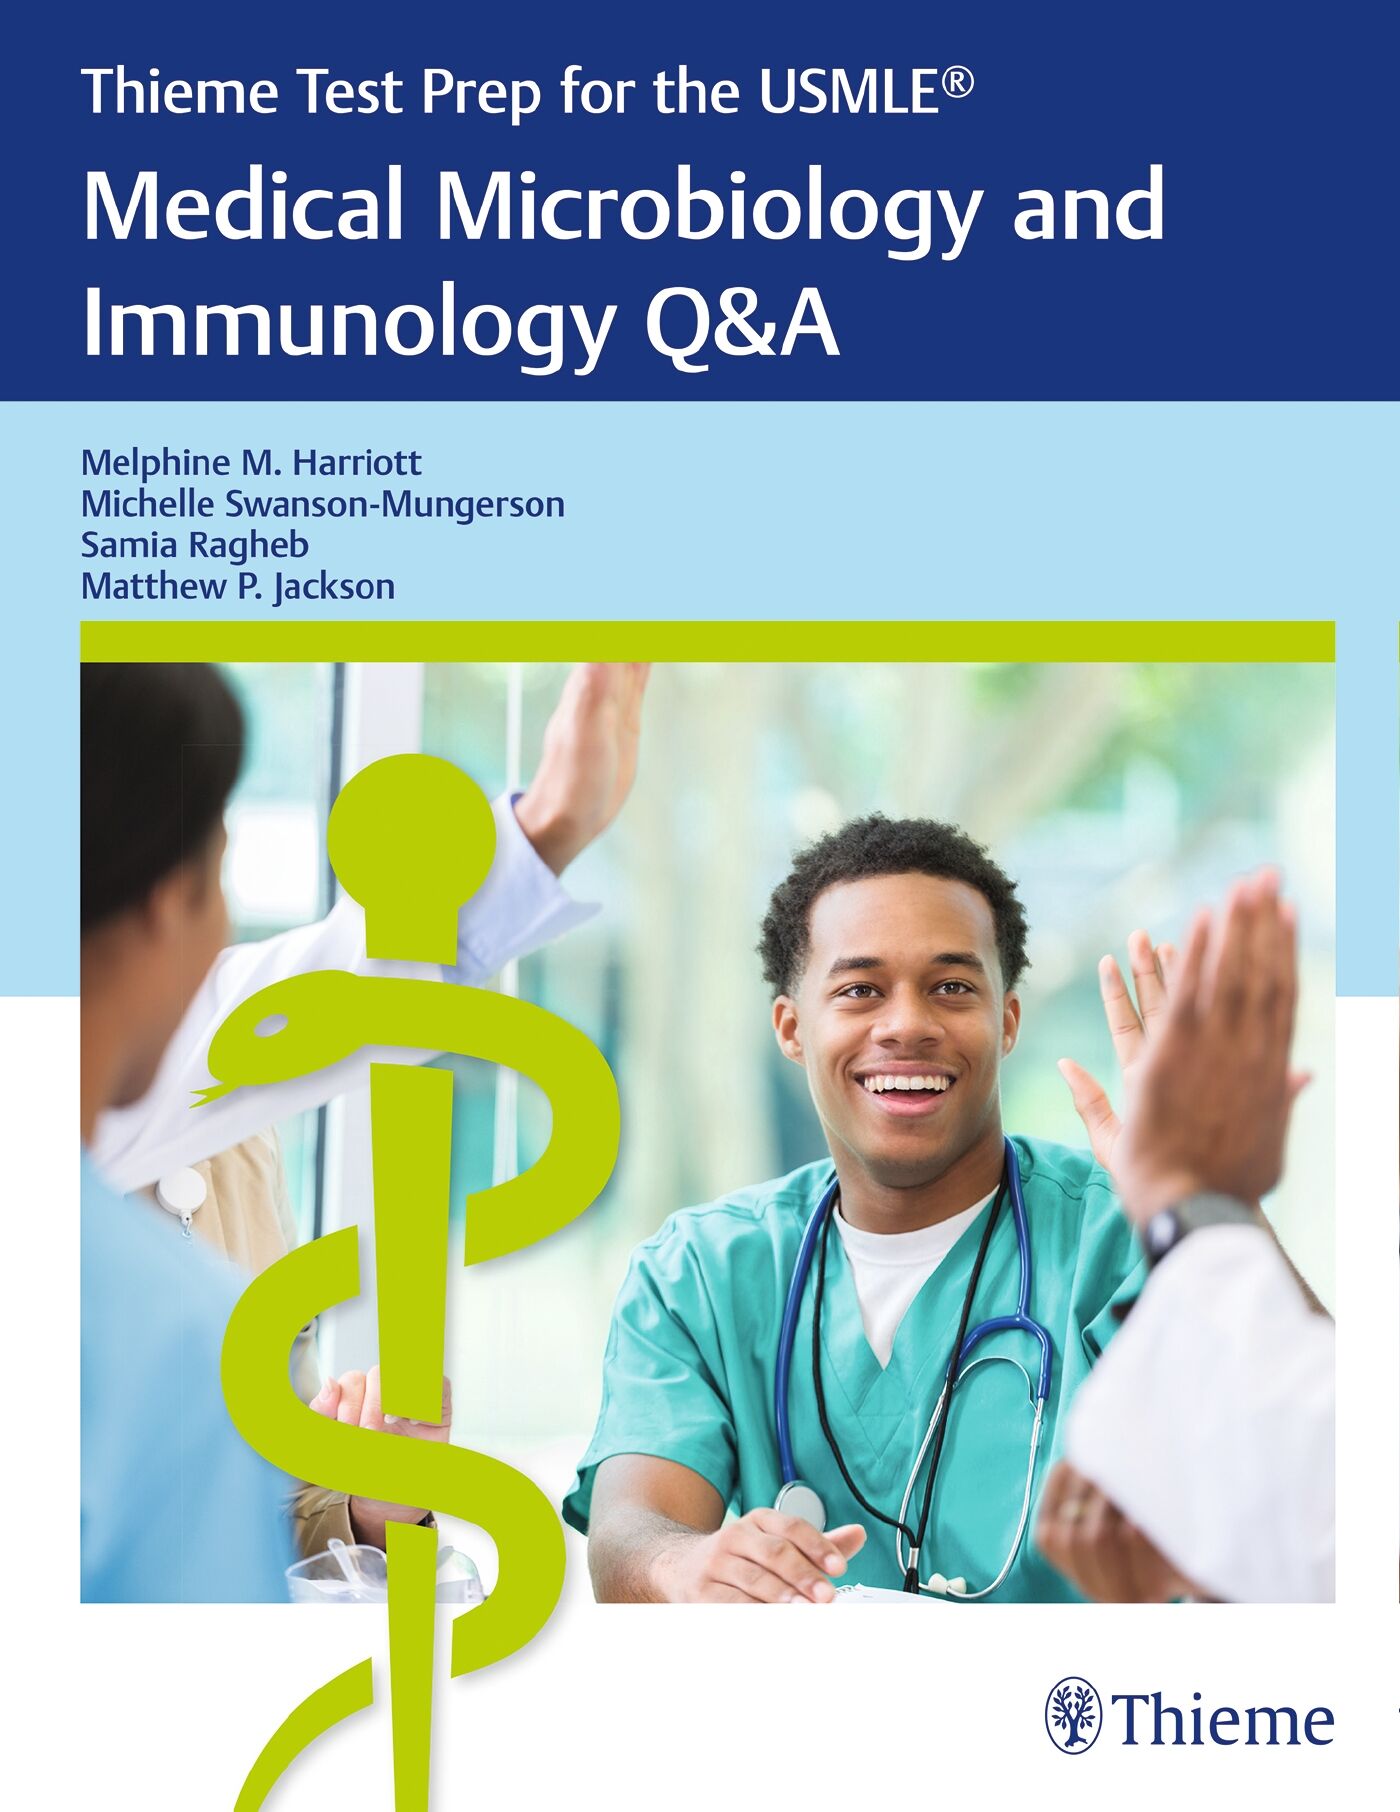 Thieme Test Prep for the USMLE®: Medical Microbiology and Immunology Q&A, 9781626233836